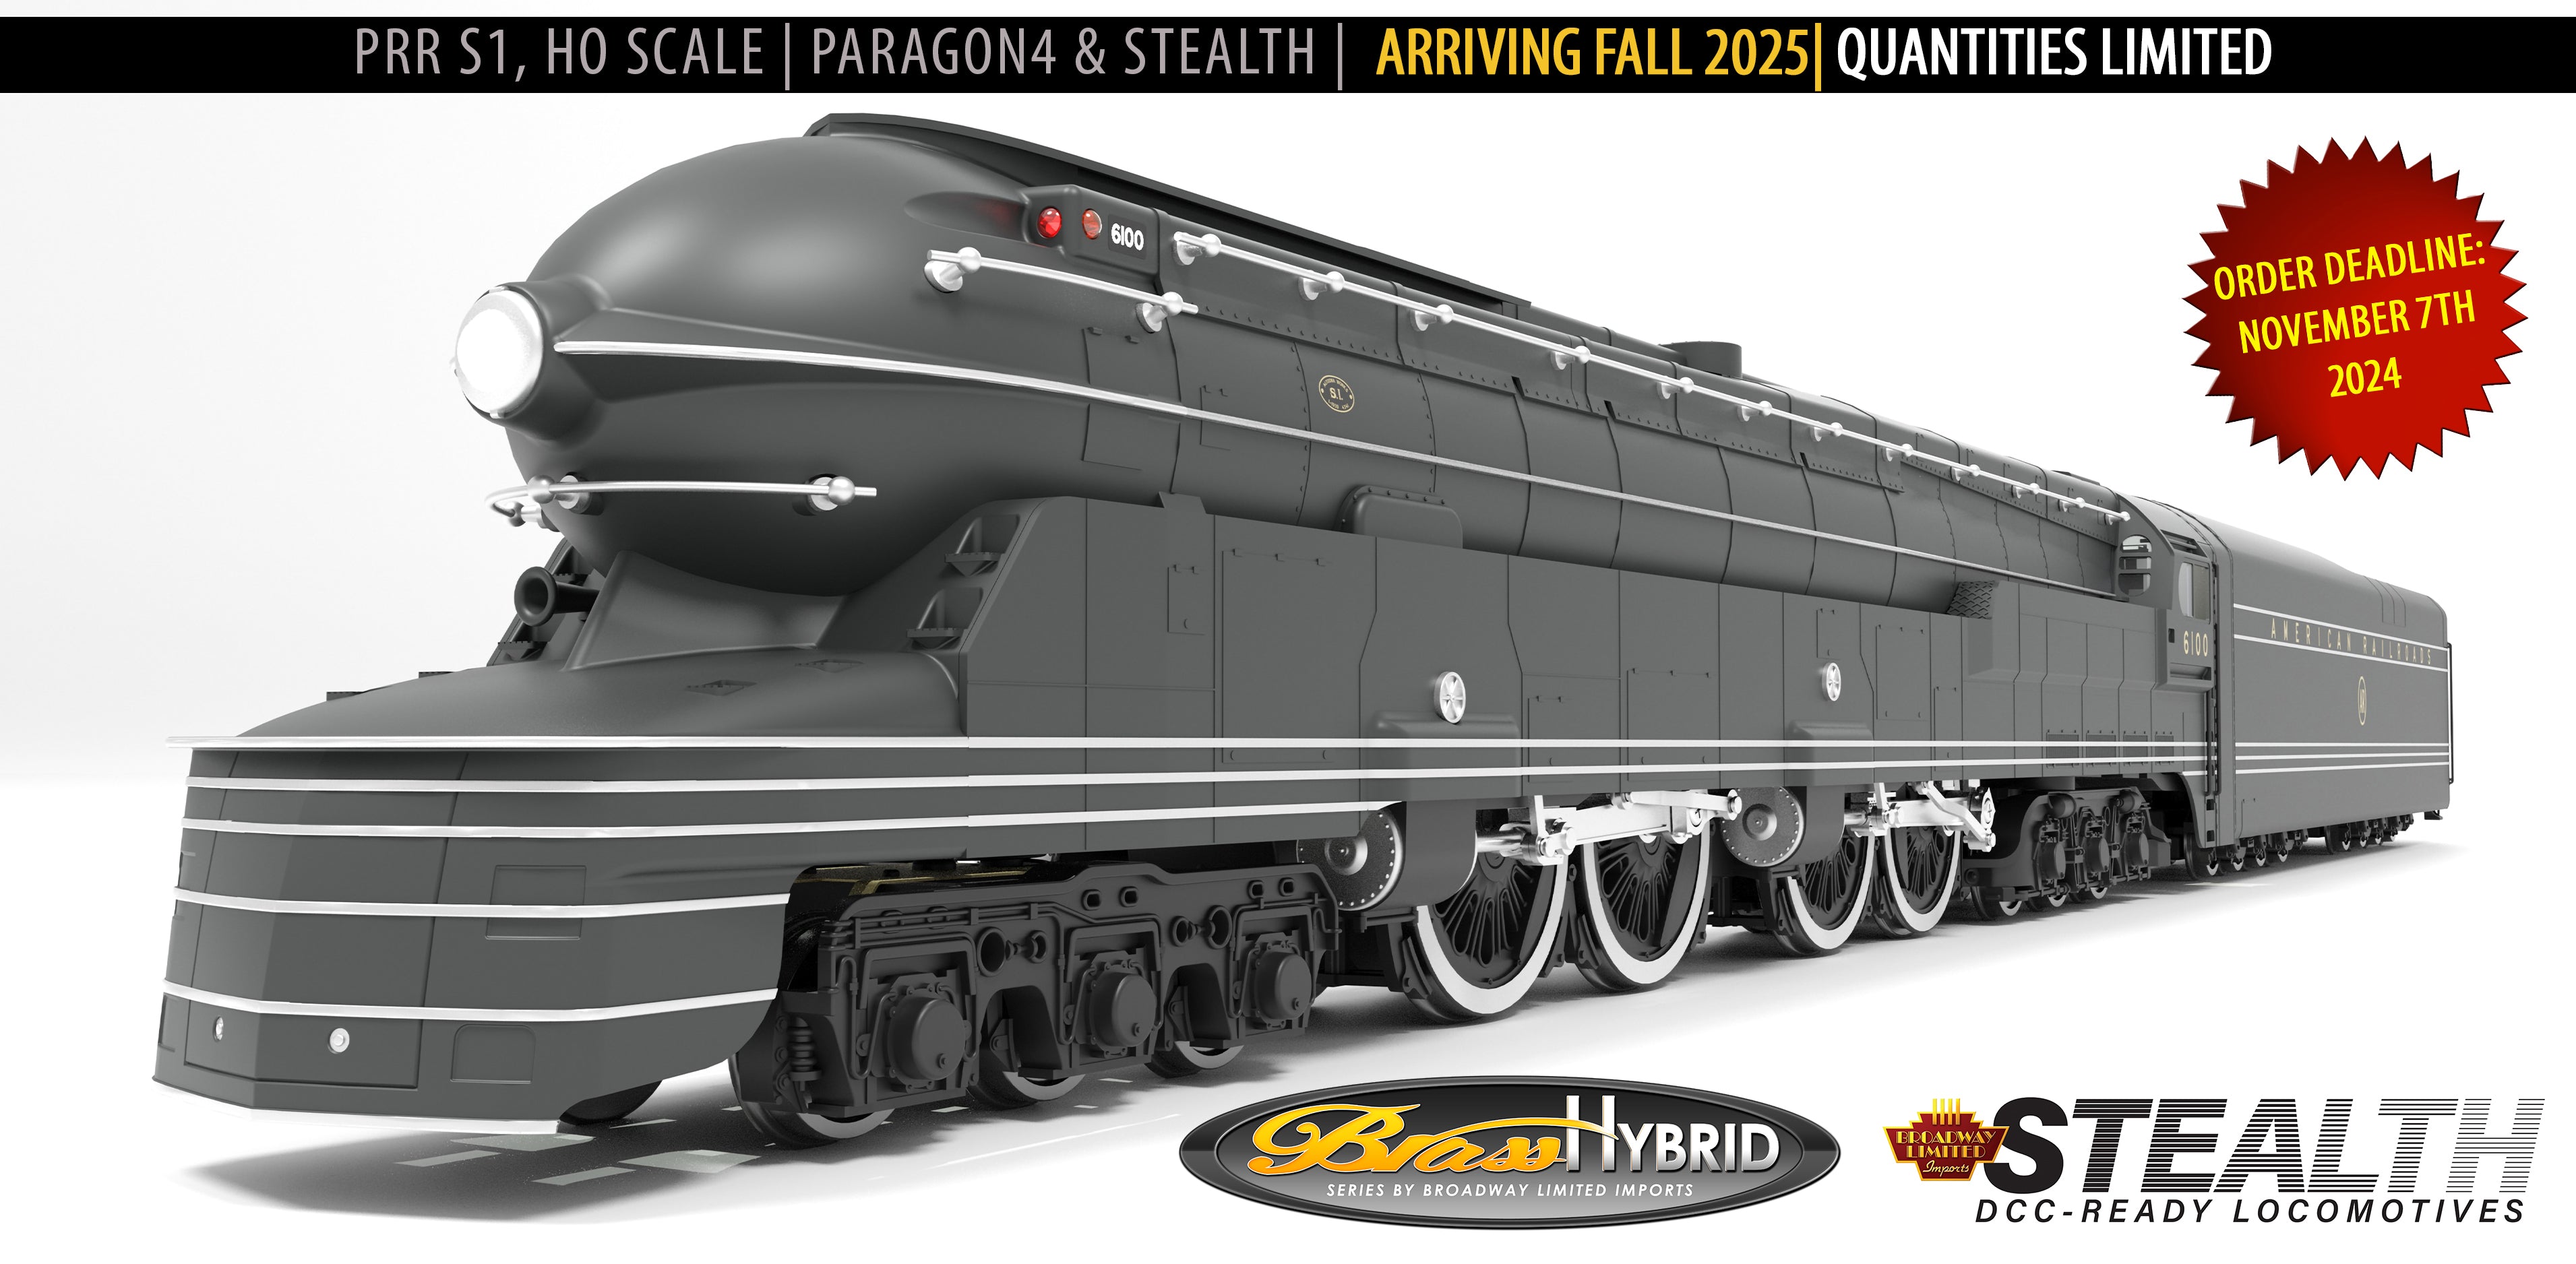 NEW PRODUCT ANNOUNCEMENT: The Brass-Hybrid PRR S1, HO Scale